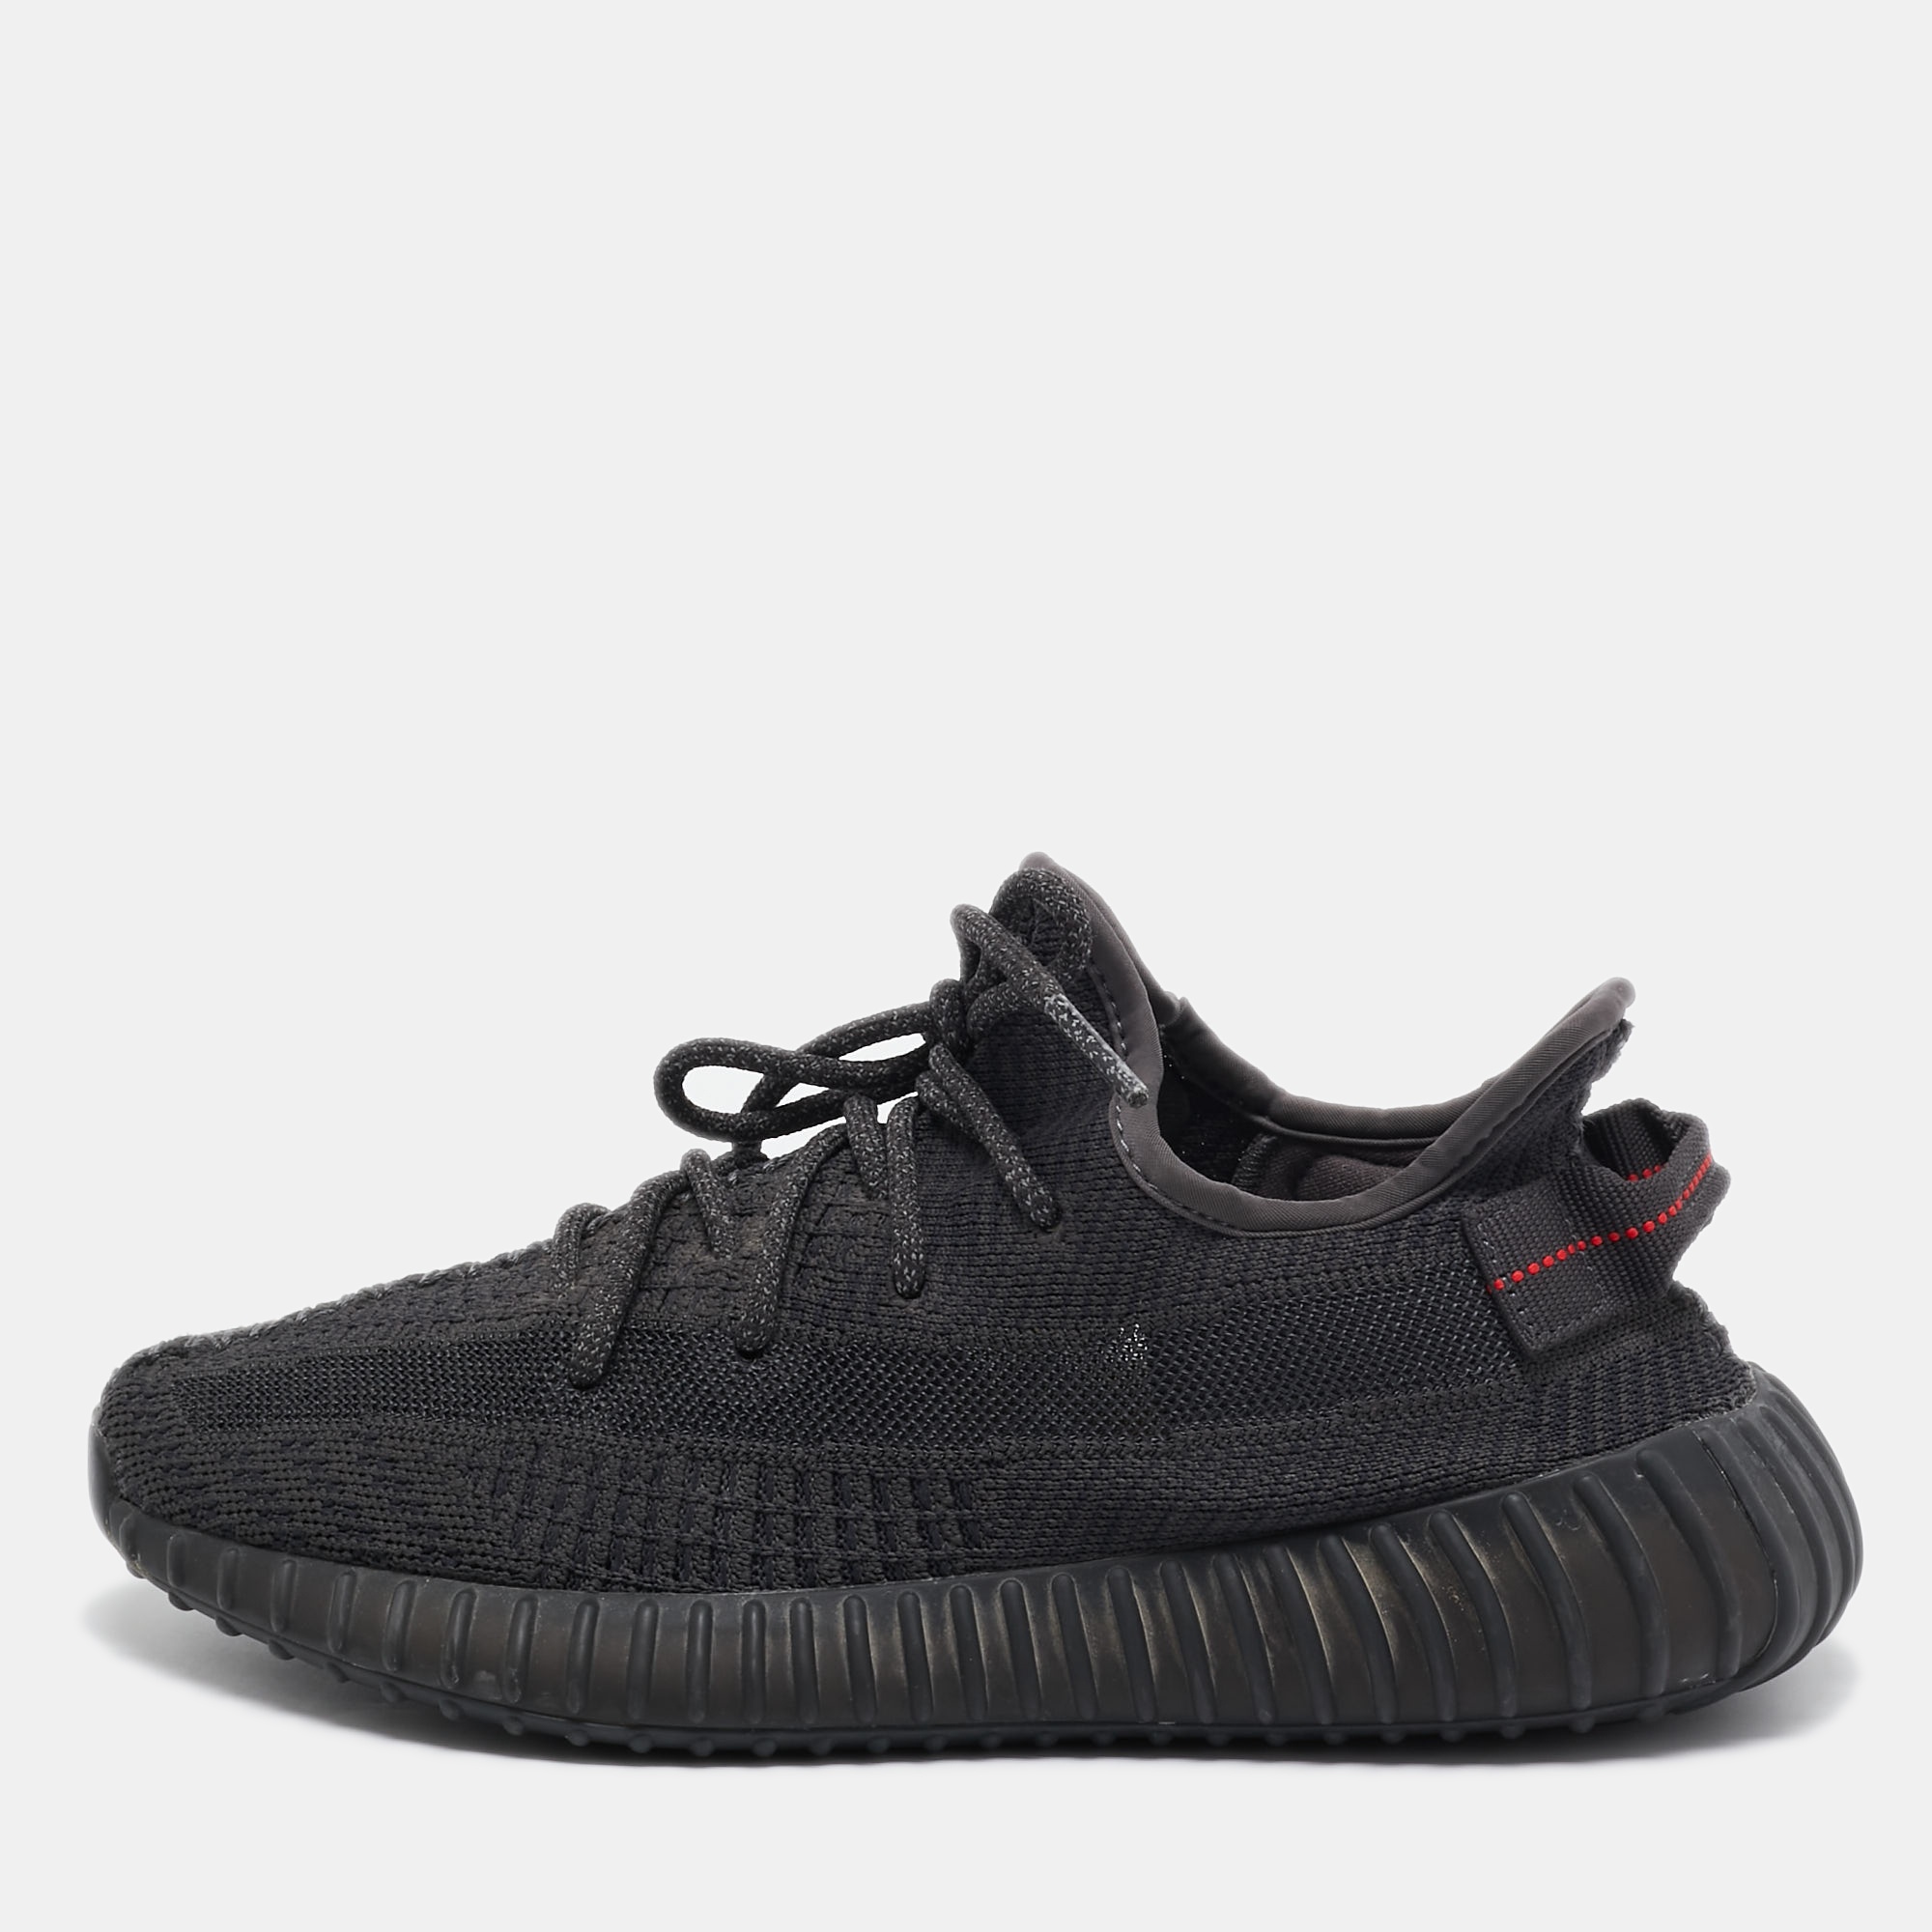 

Yeezy x Adidas Black Mesh and Fabric Boost 350 V2 Black Sneakers Size